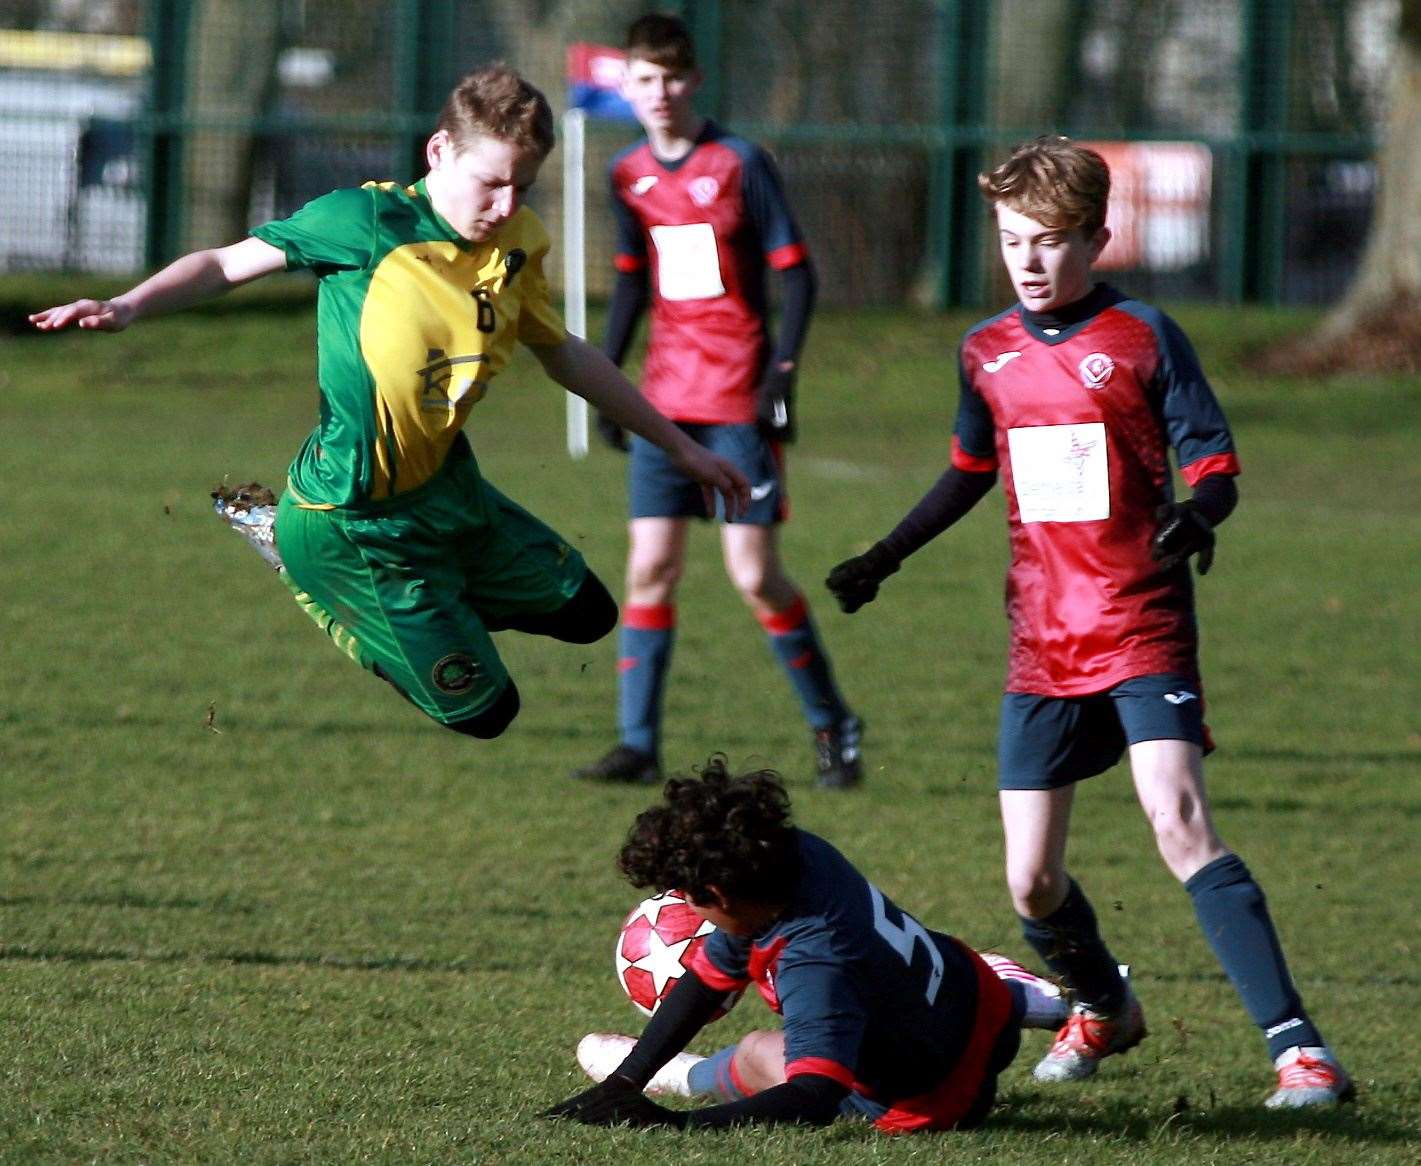 Cliffe Woods Colts under-15s (green) take evasive action against Hempstead Valley under-15s. Picture: Phil Lee FM26563336